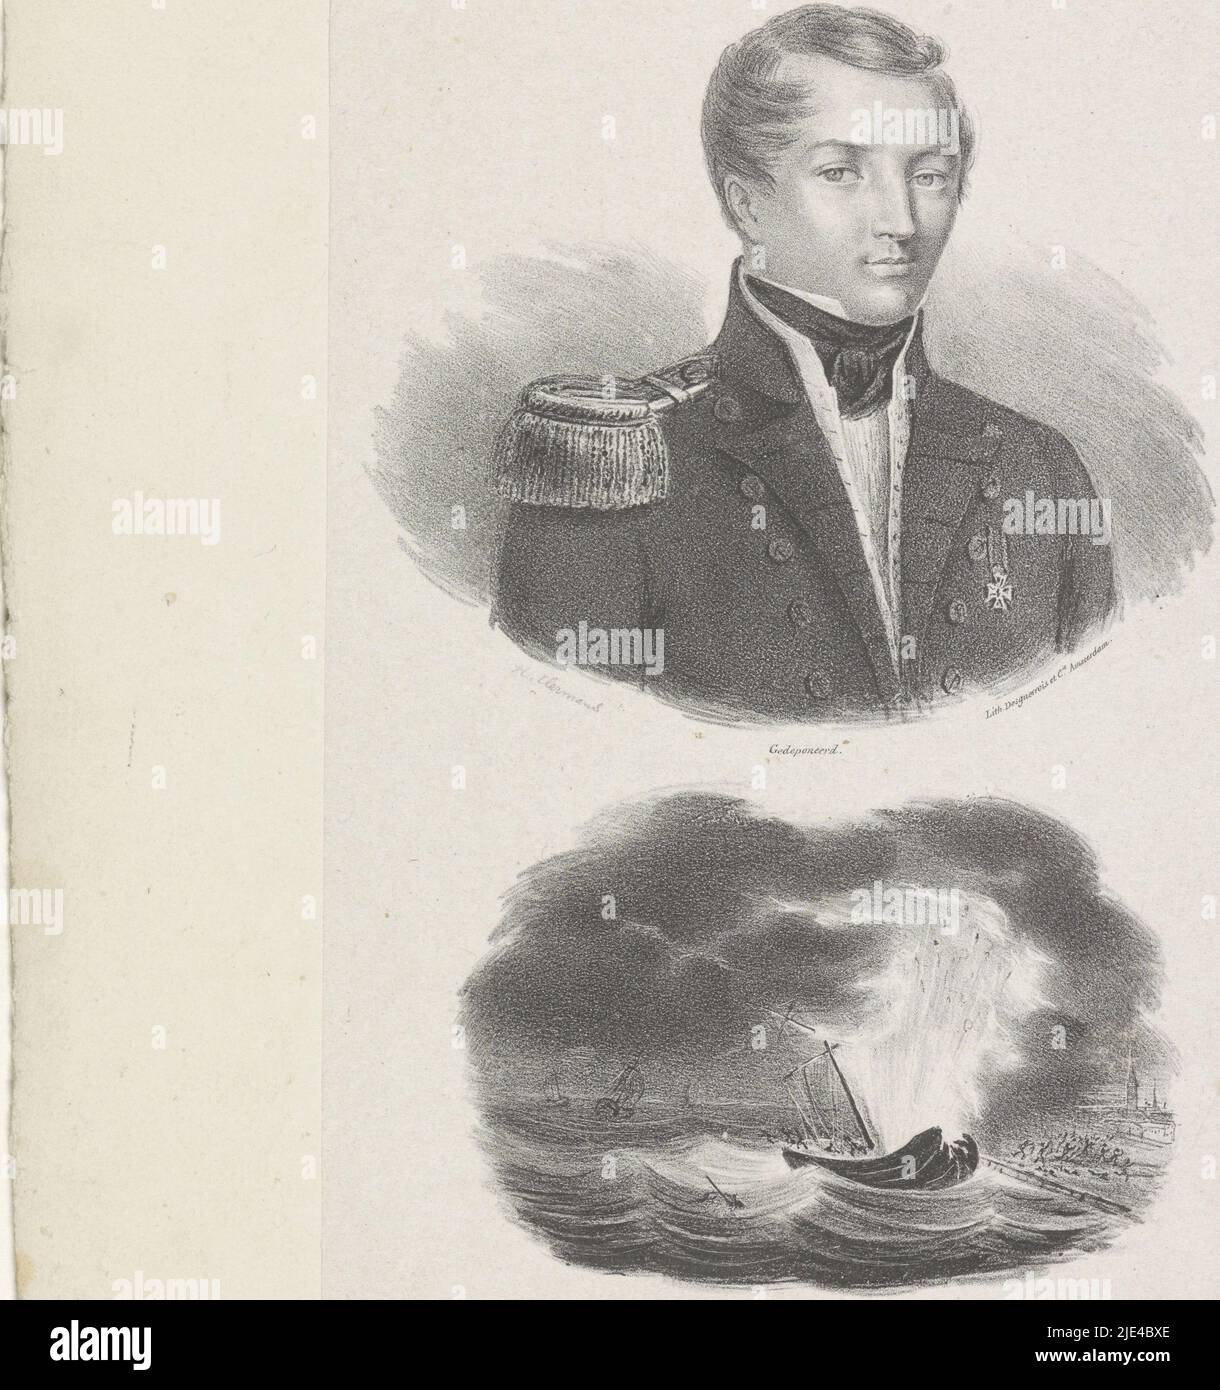 Portrait of Jan van Speijk and the explosion of his ship, J.B. Clermans, 1831, The person portrayed is wearing a military uniform with an epaulette and two knighthoods on his chest. Below the portrait his boat exploding in the harbor of Antwerp. Below that his name and date of birth and death., print maker: J.B. Clermans, (mentioned on object), printer: Desguerrois & Co., (mentioned on object), publisher: Anthonius Johannes van Tetroode, (mentioned on object), Amsterdam, 1831, paper, h 365 mm × w 265 mm Stock Photo